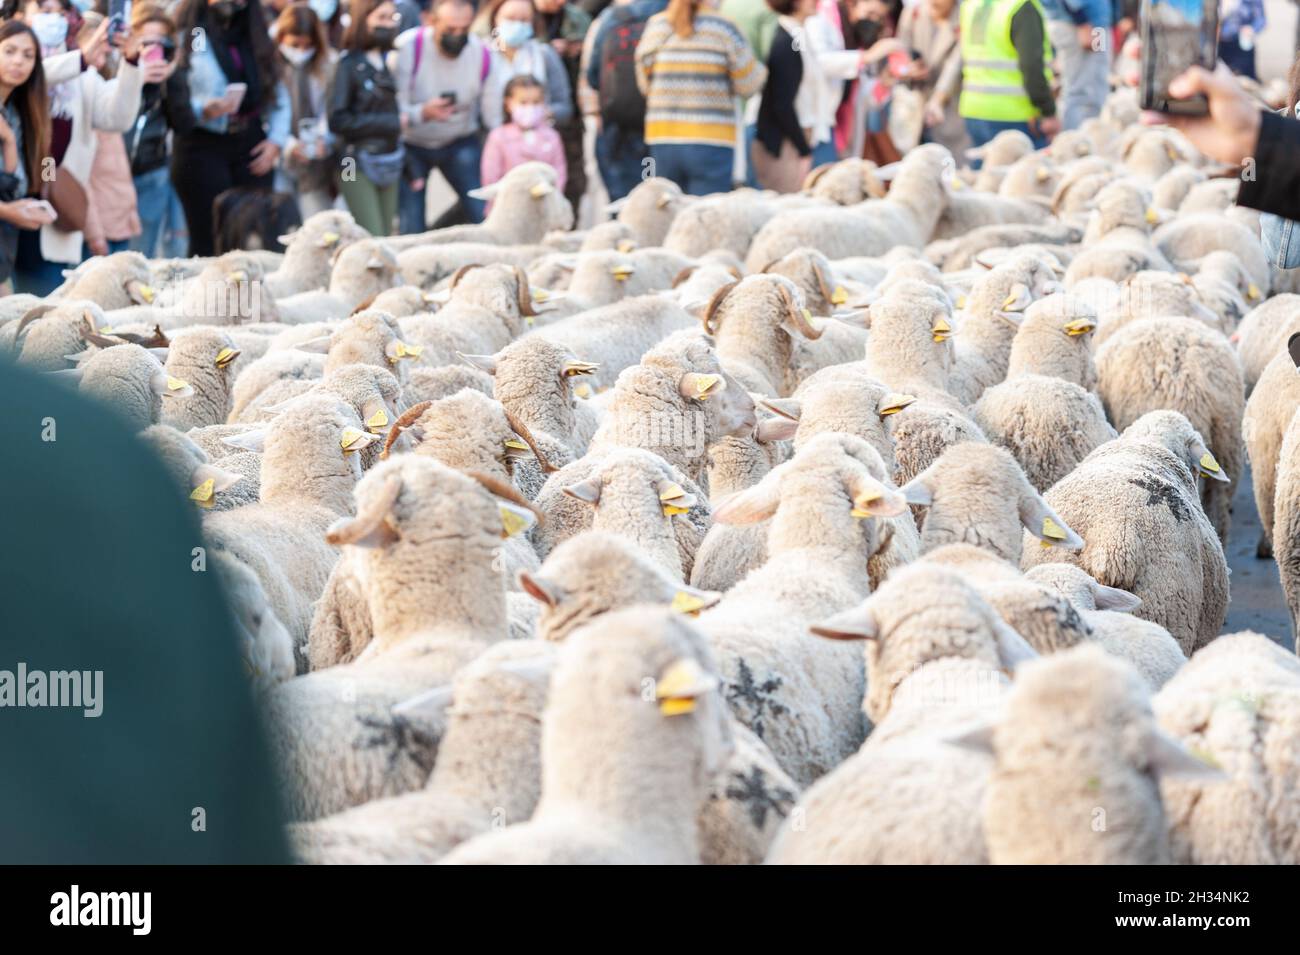 Madrid, Spain; October 24, 2021: Vindication of Transhumance in the center of Madrid. Sheep and goats walking through the streets of downtown madrid w Stock Photo